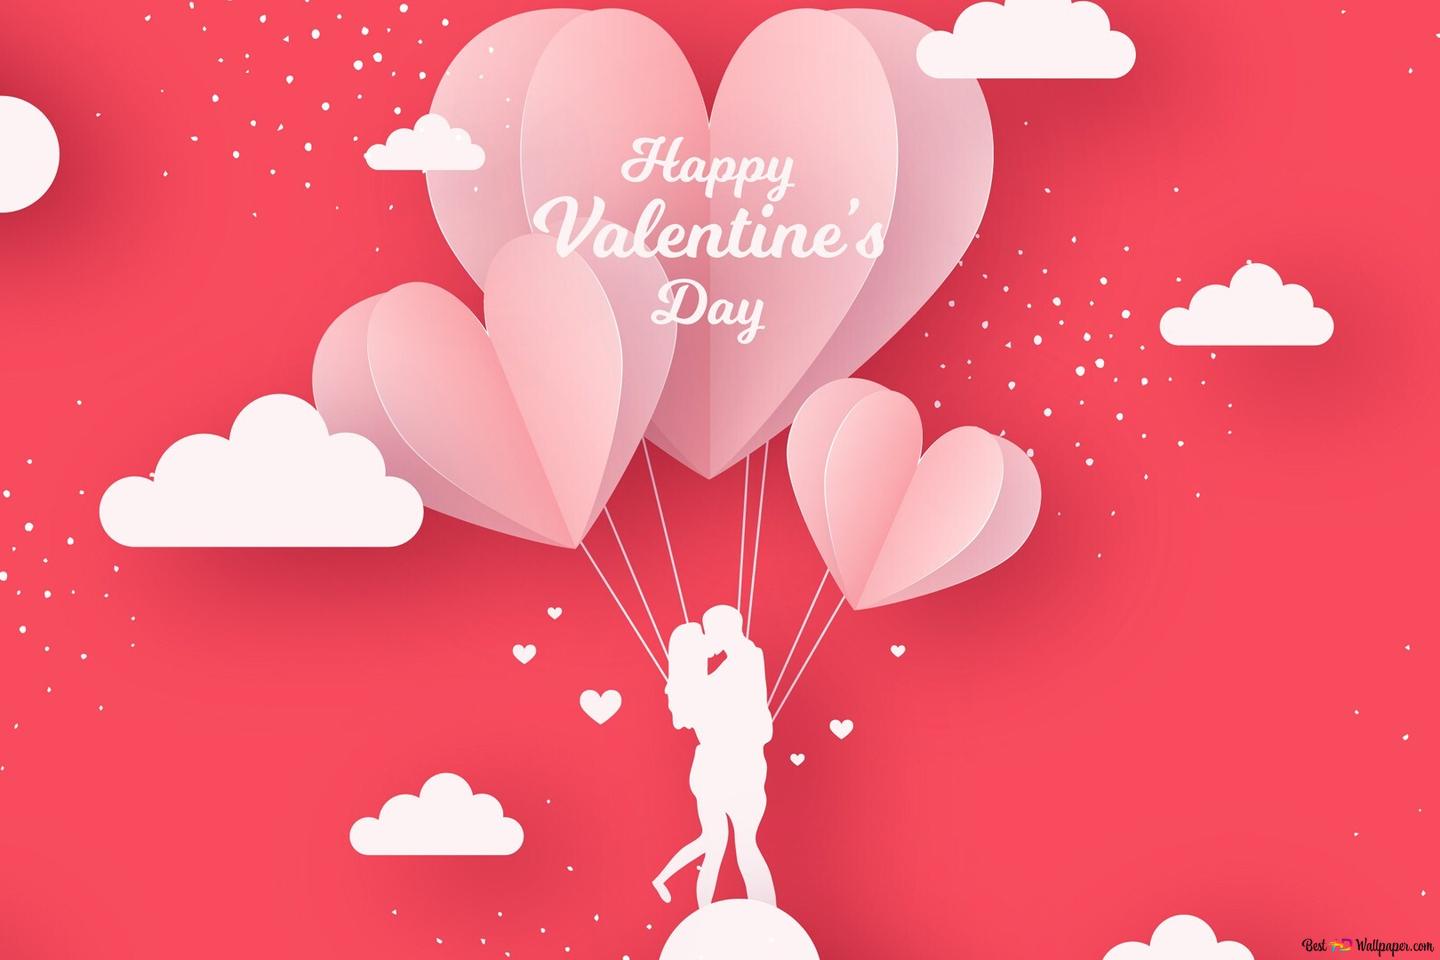 Love sky clouds and happy valentine's day lettering in the heart above them HD wallpaper download